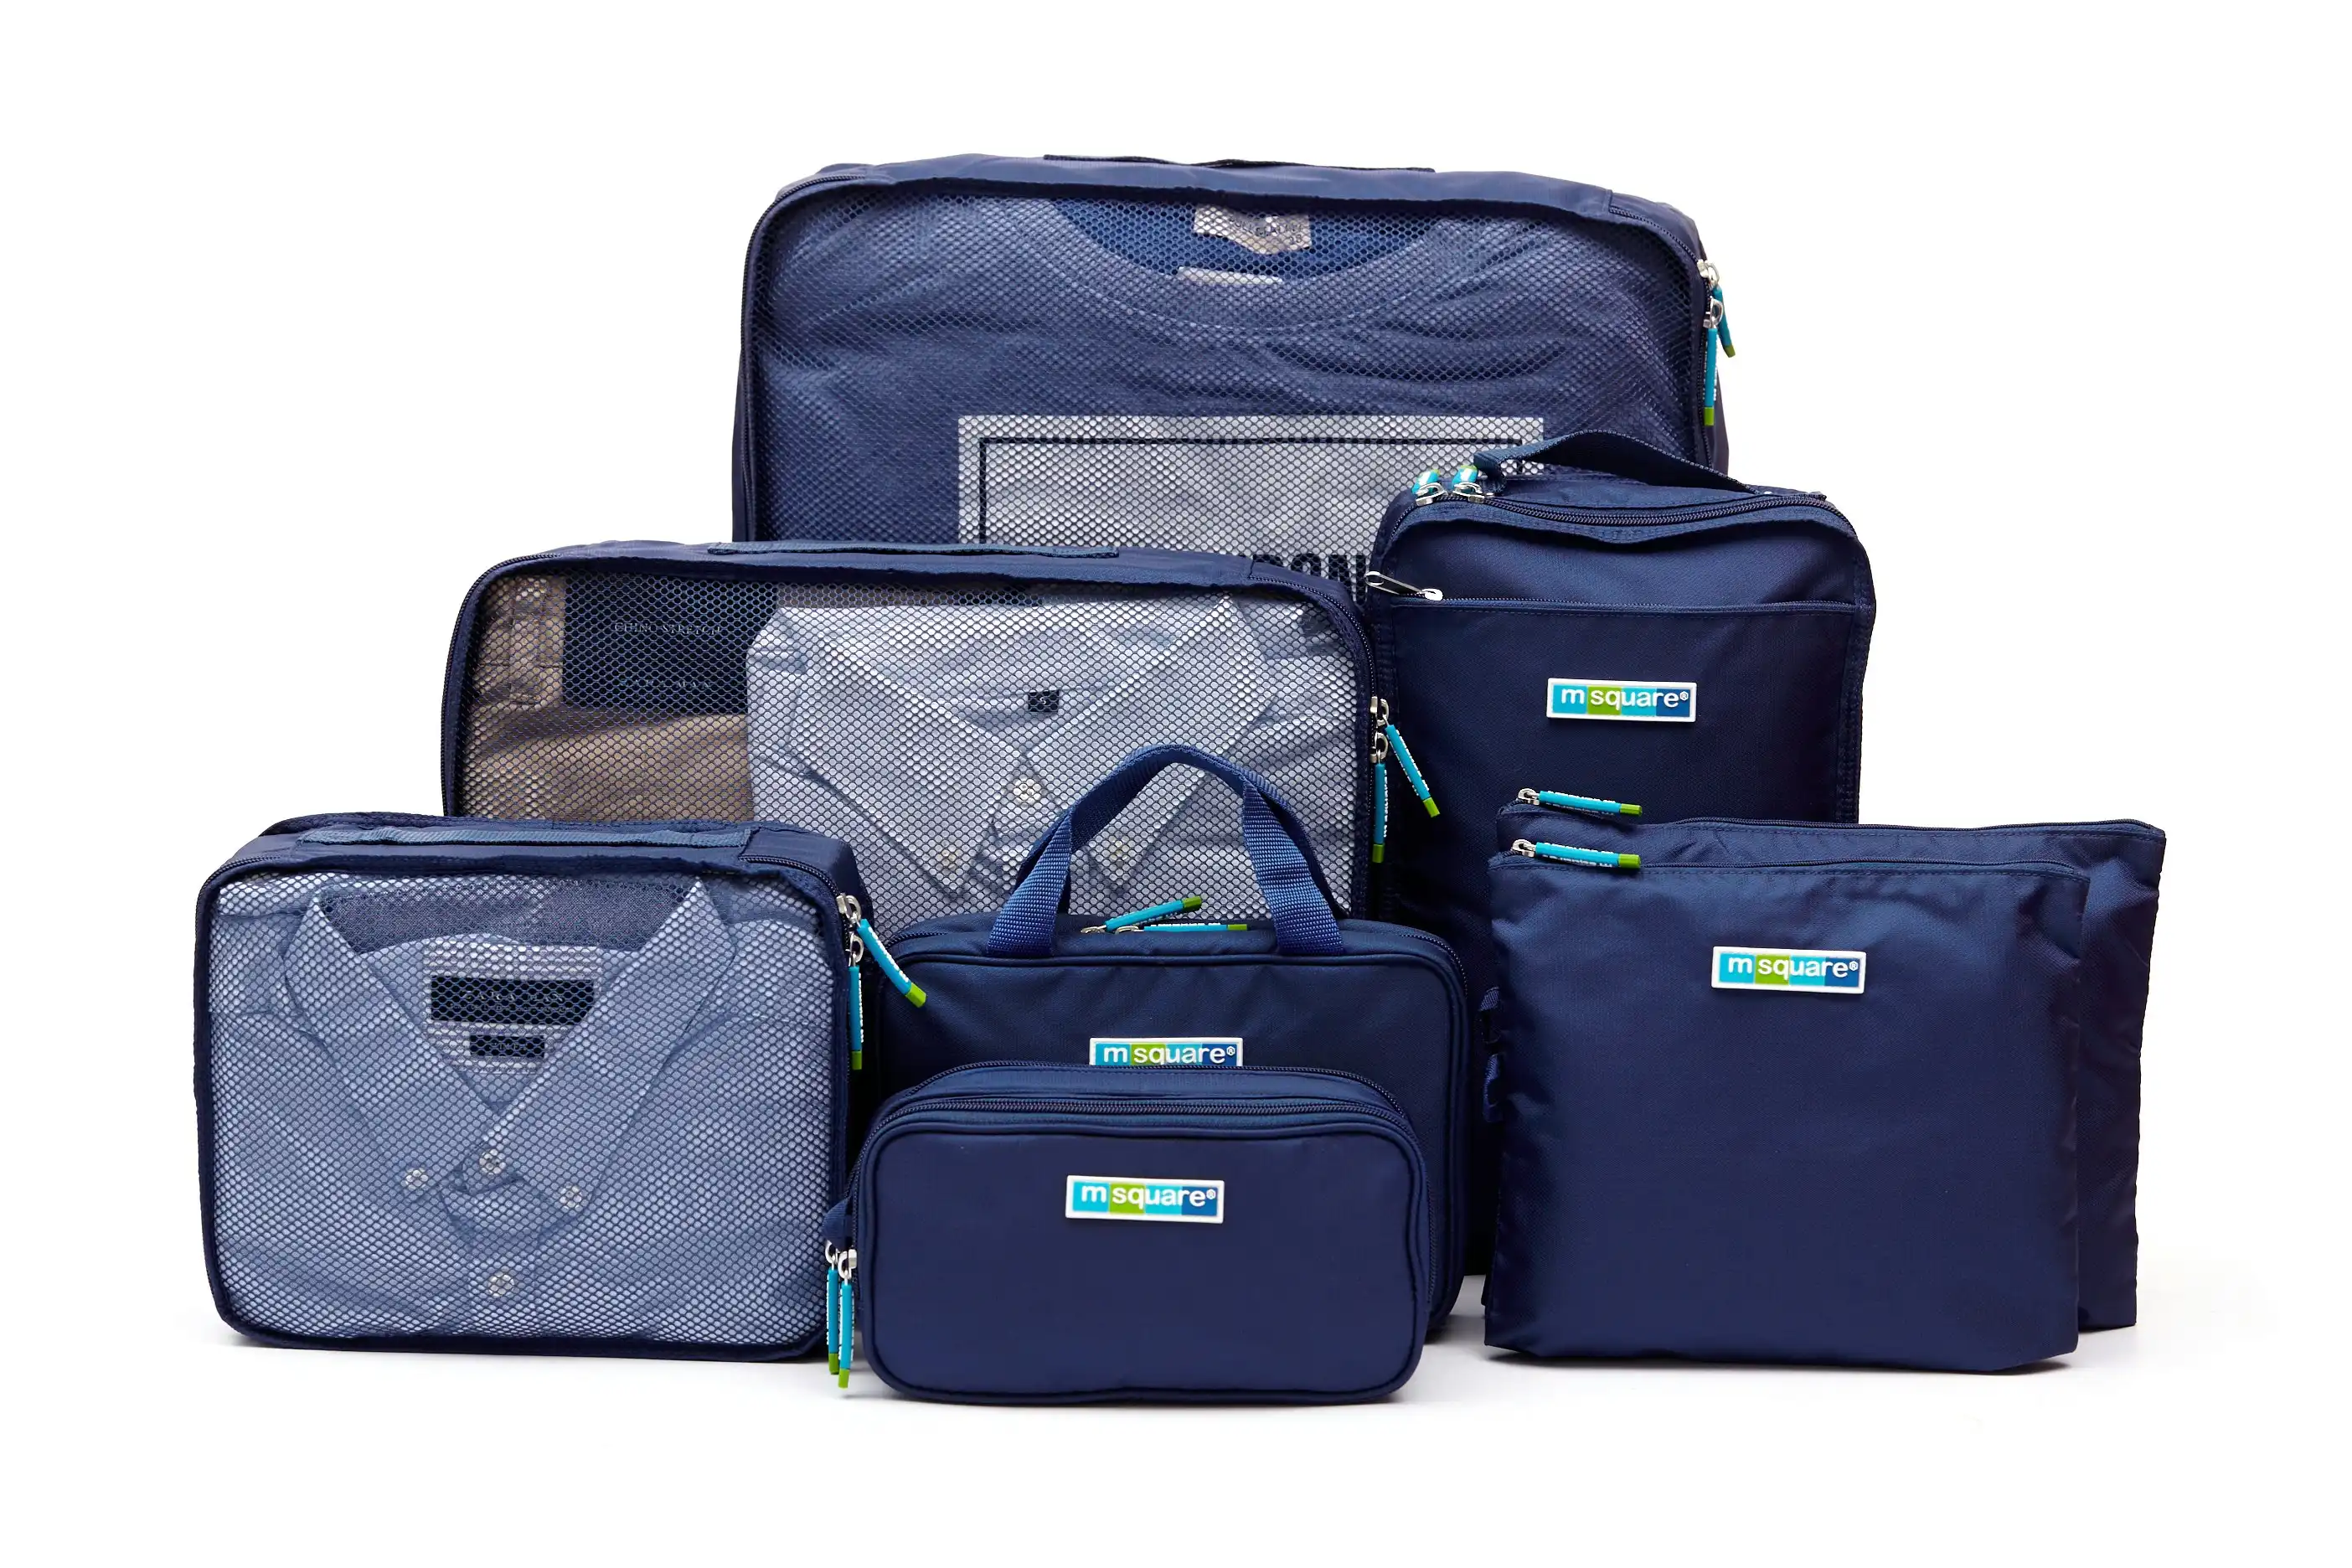 M Square Travel Luggage Packing Organizer 8 Pcs Set Storage Bags Packing Collection Pouch Blue